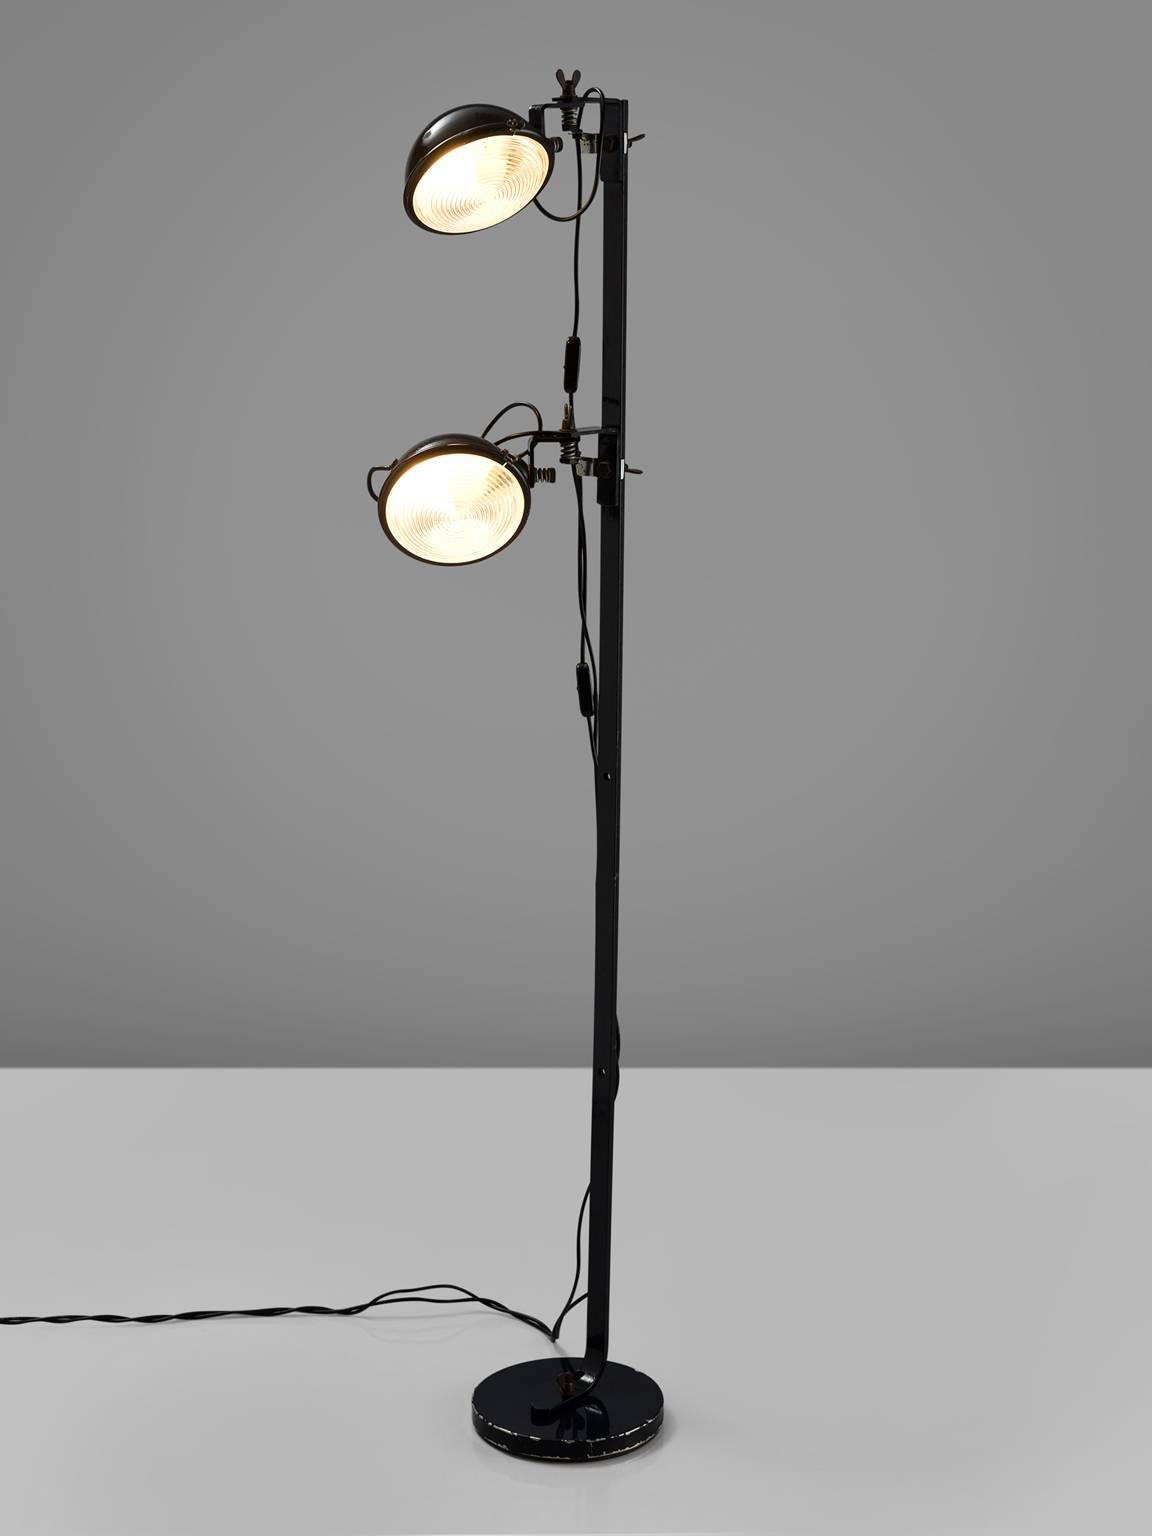 Cesare Leonardi for Lumenform, floor lamp, metal, Italy, 1950s.

Stunning floor lamp with two metal shades in all directions and can be switched of separately. Each shade is connected to the main metal rod. The shades are round and robust and have